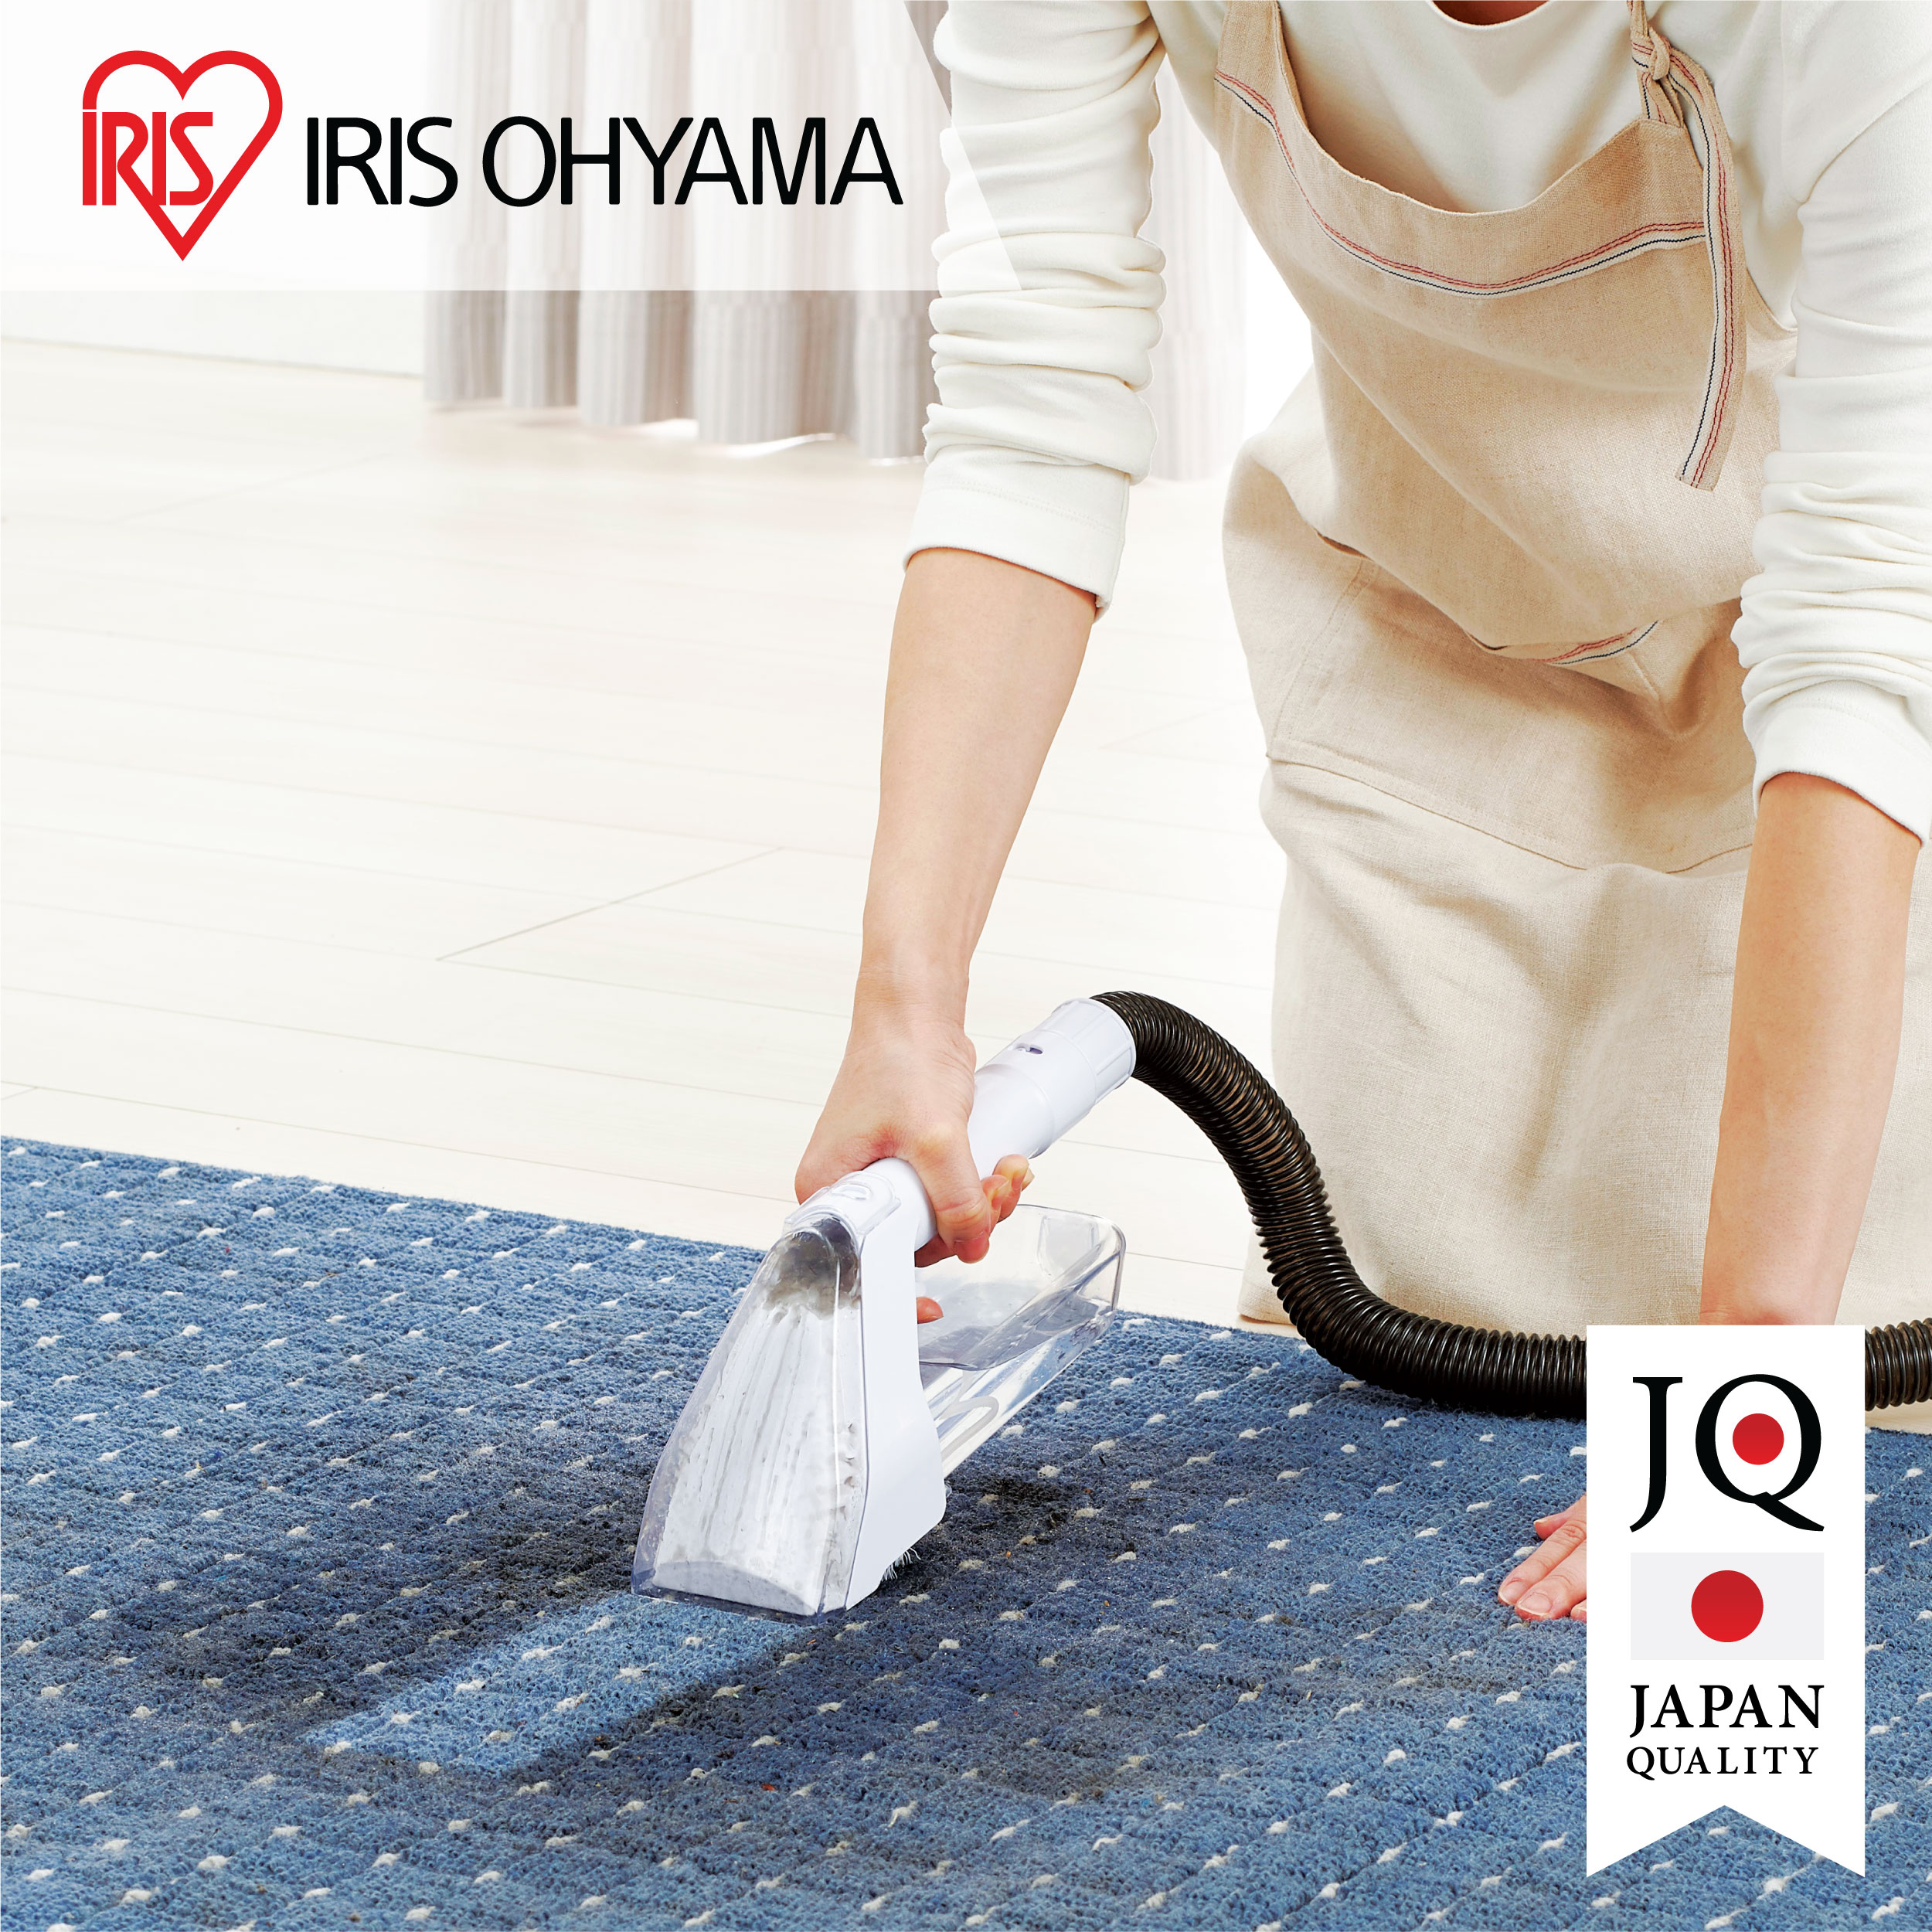 Iris Ohyama RNS-P10-W Rinser Cleaner Stain Remover